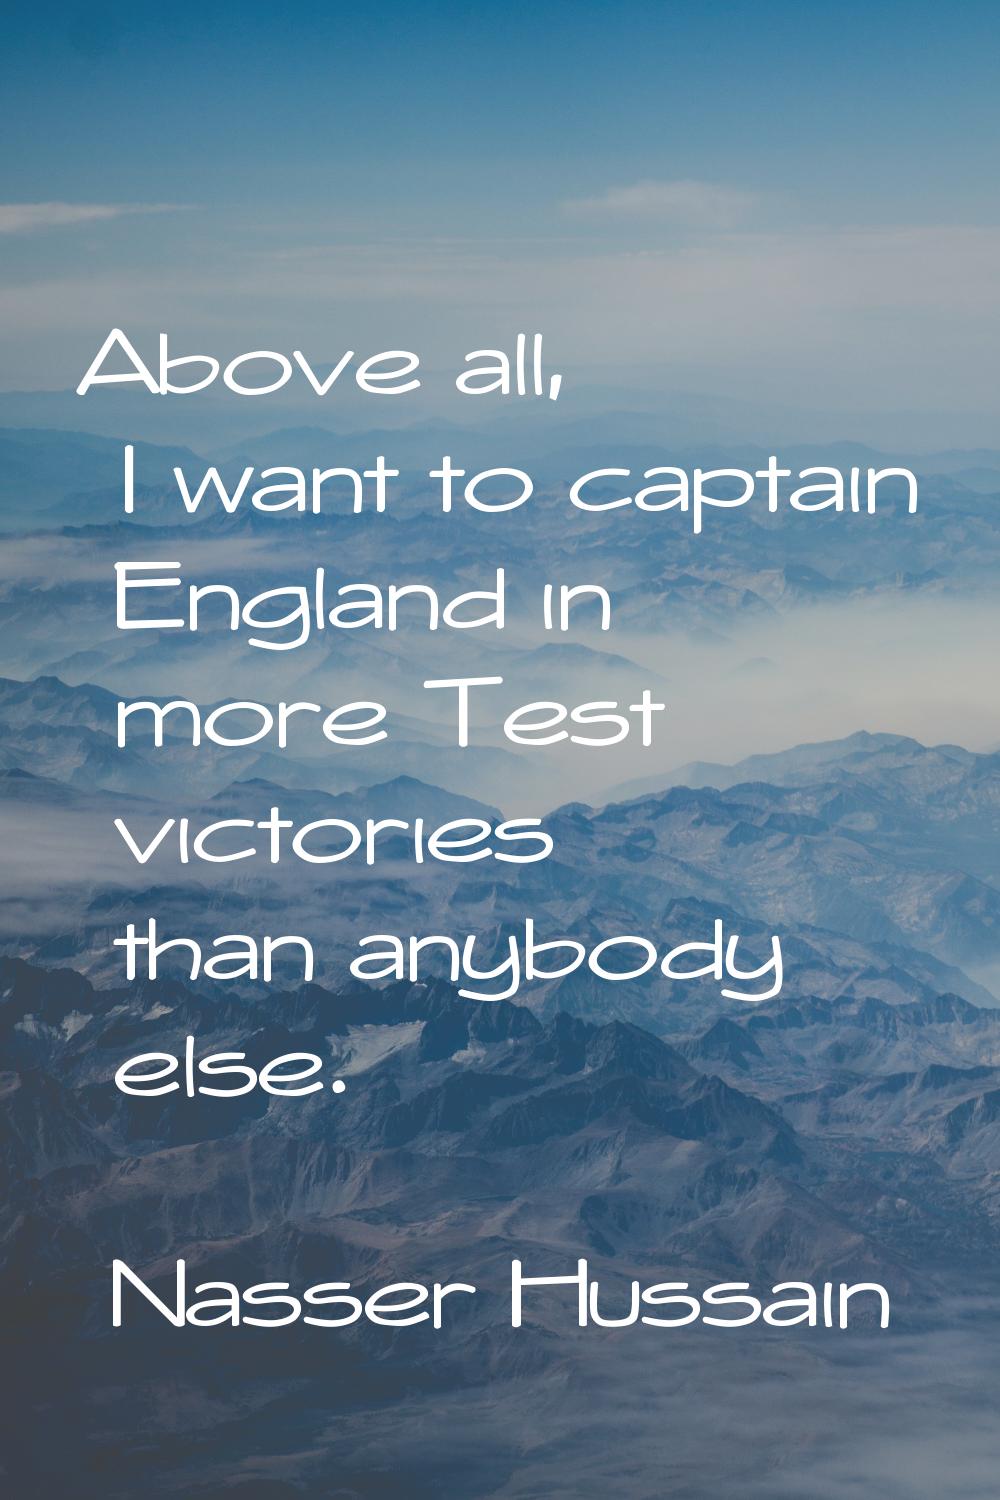 Above all, I want to captain England in more Test victories than anybody else.